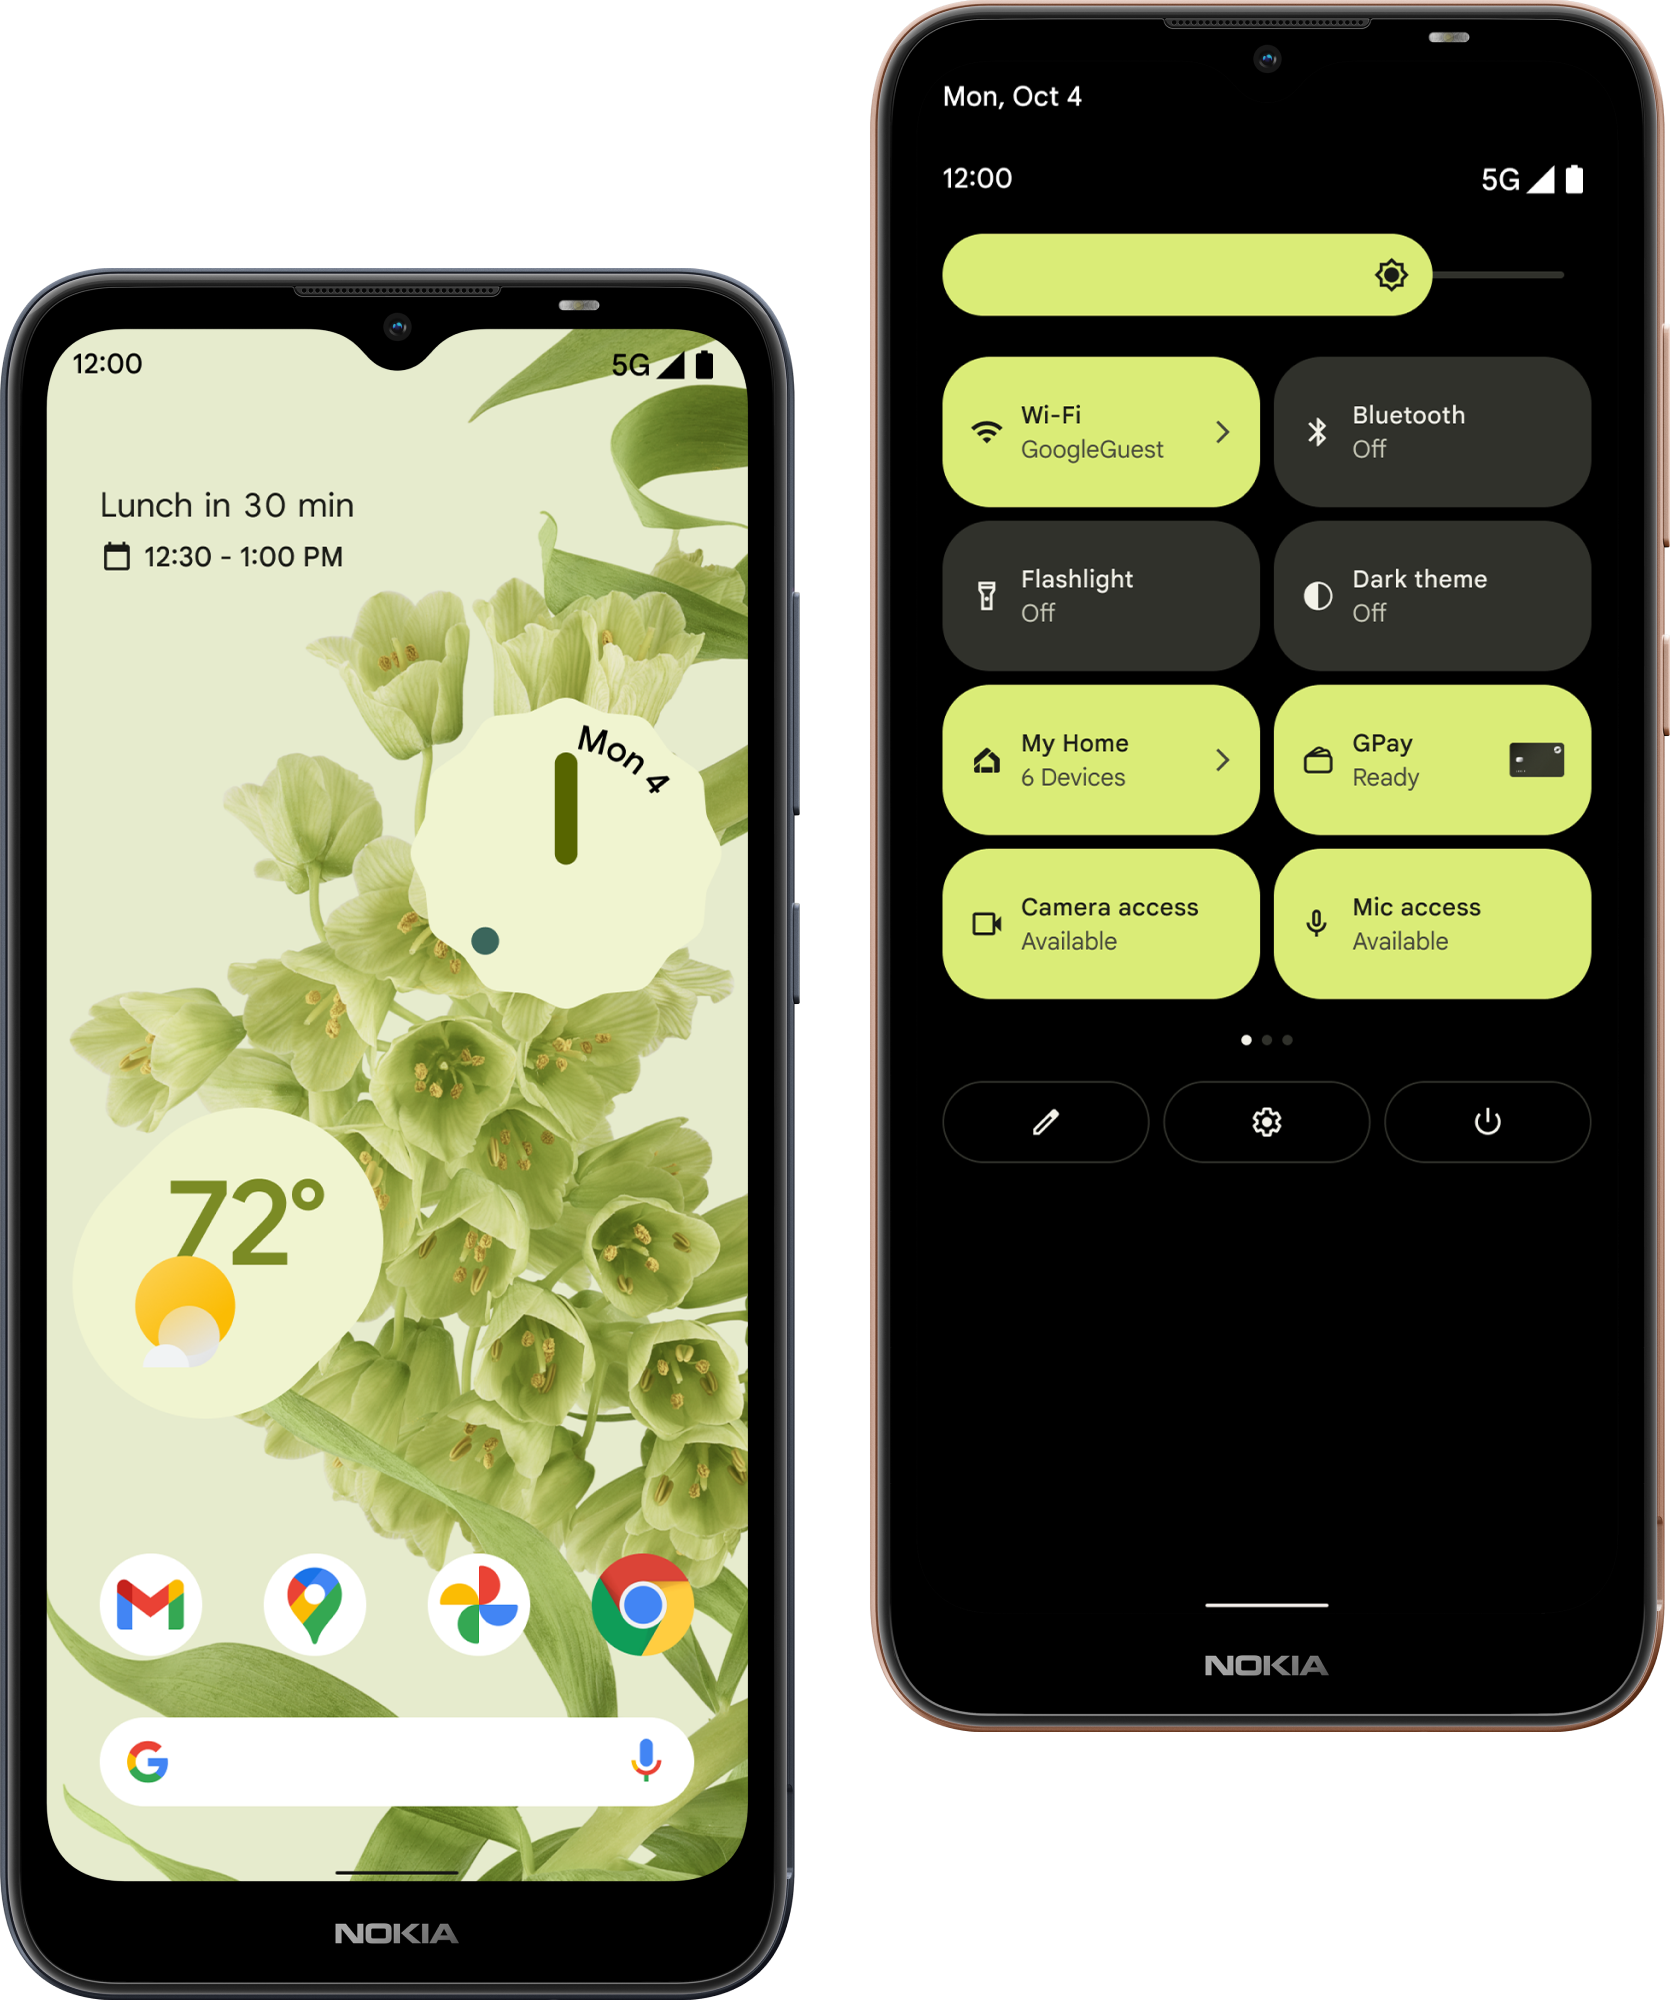 Nokia smartphones with latest Android 12 OS upgrades